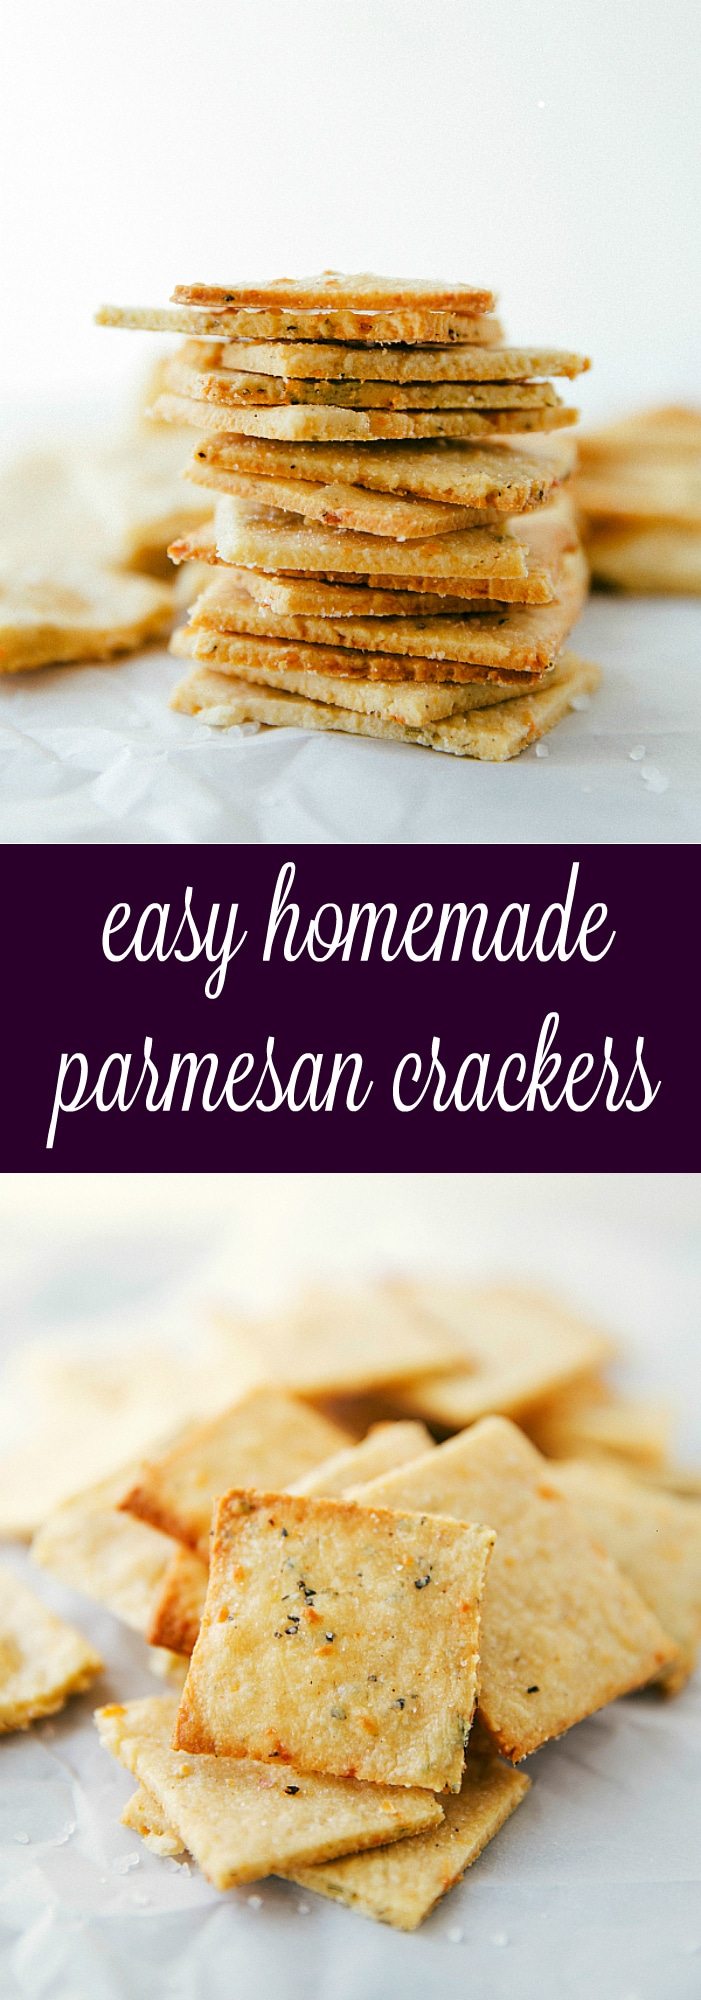 Simple and quick (15 minutes to make) homemade parmesan-herb crackers. Perfect for entertaining and snacking!